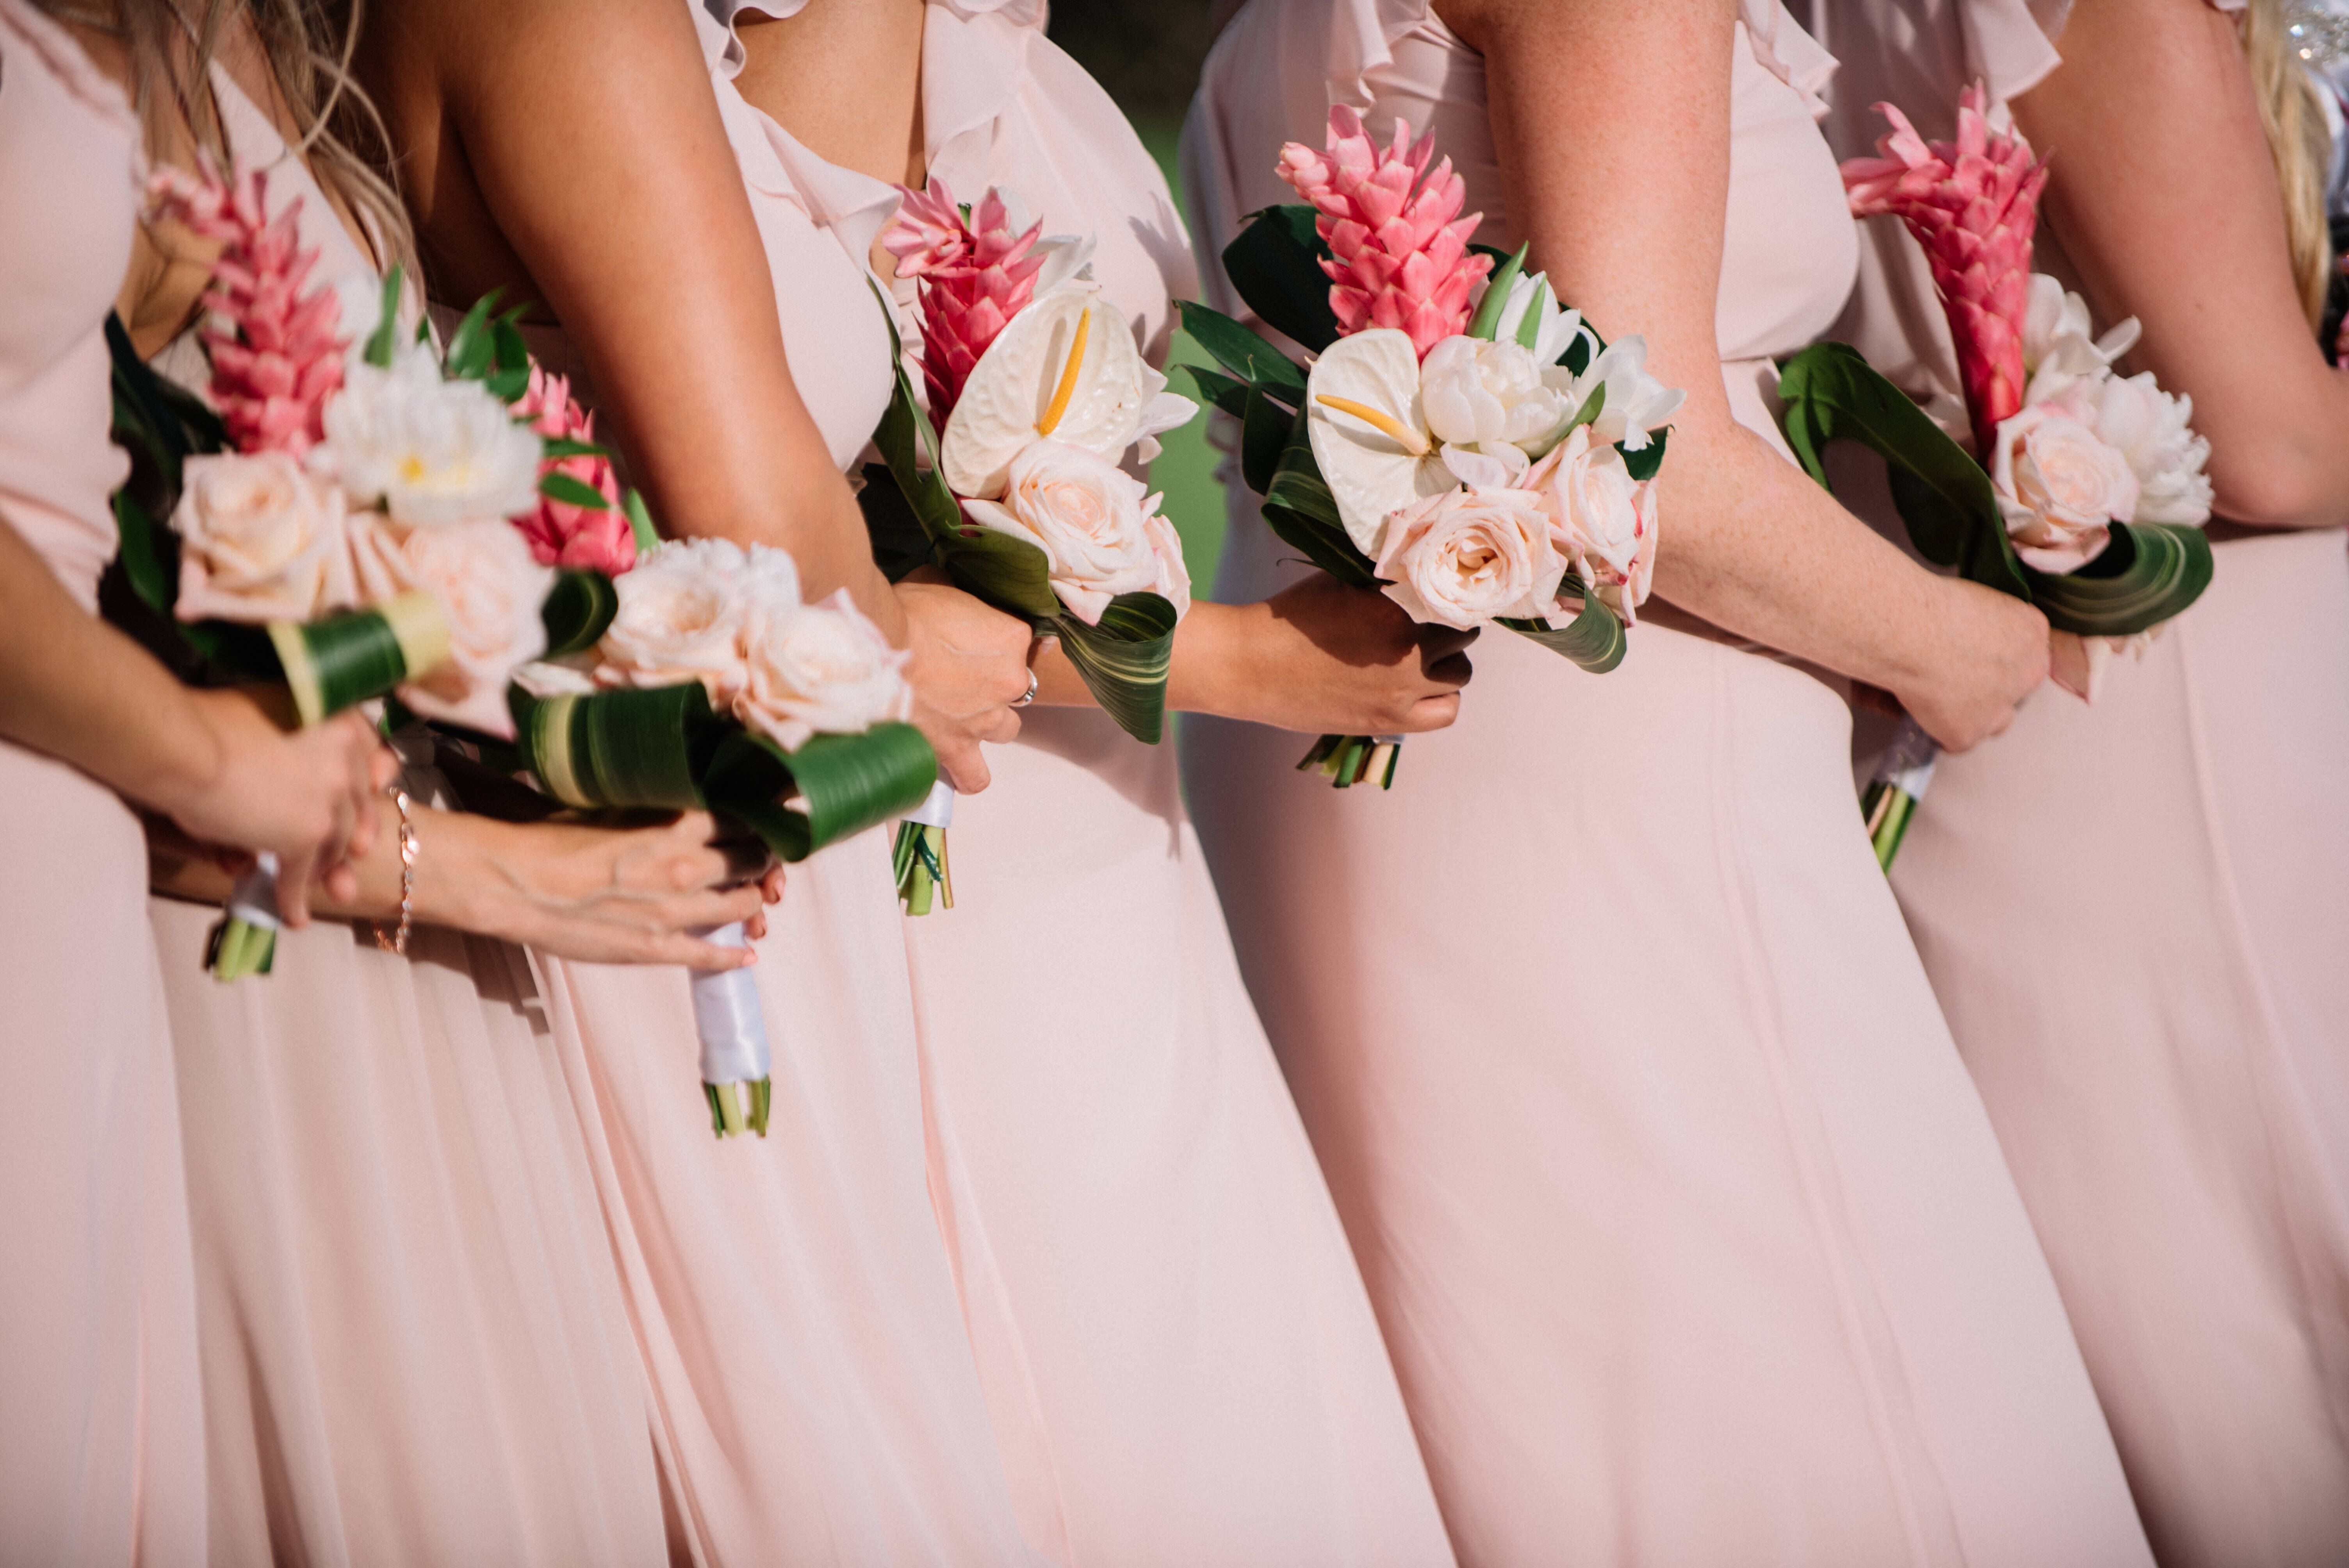 Bridesmaids With Pink Bouquets And Dresses 4141